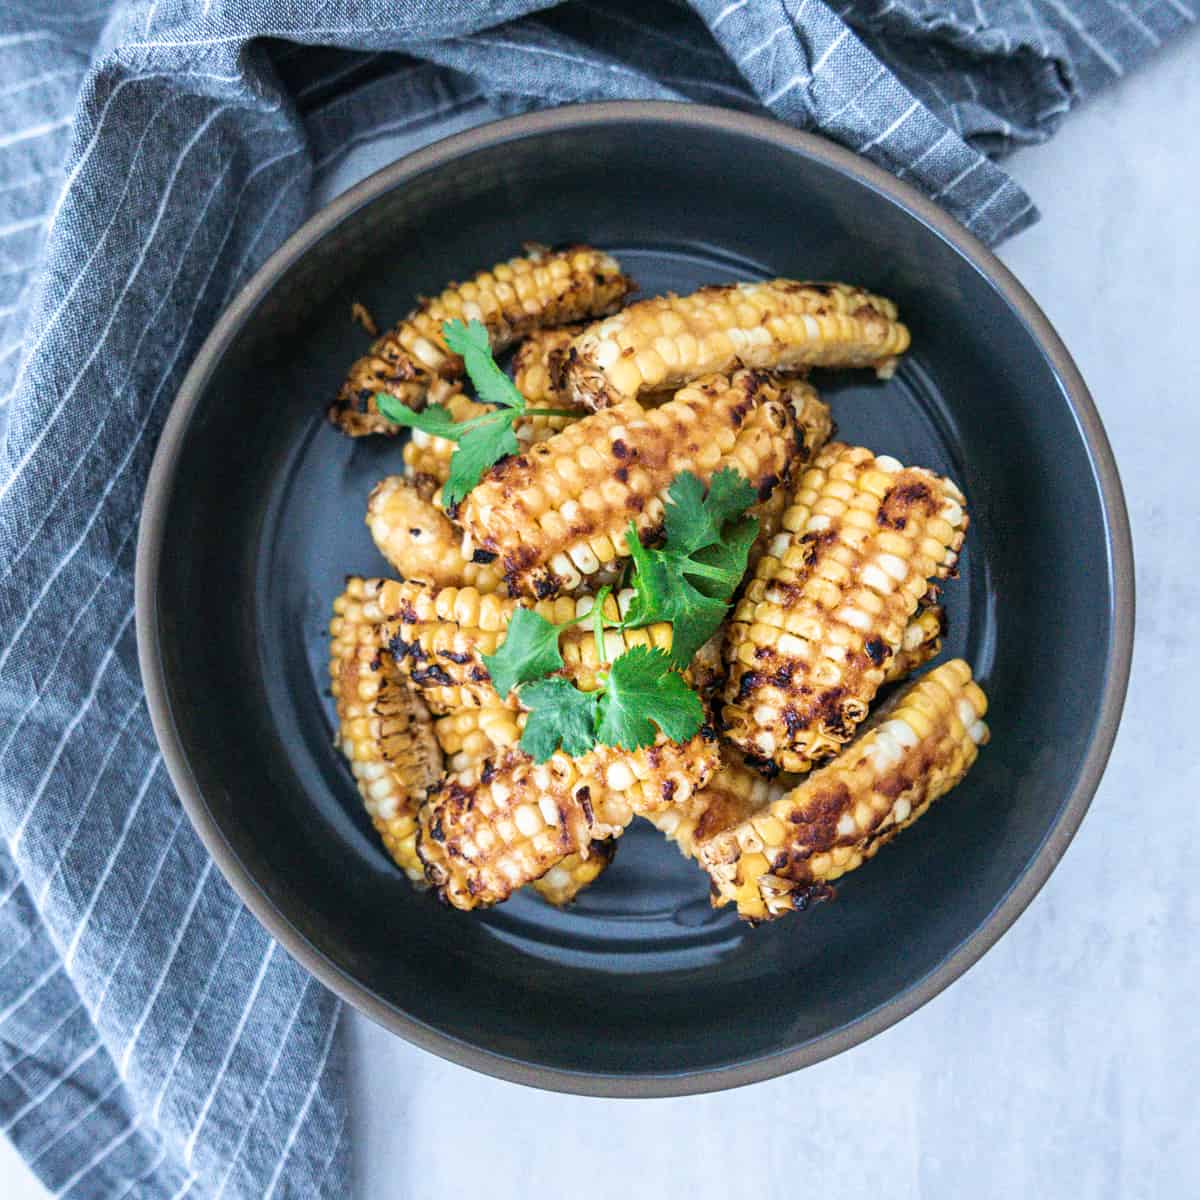  Miso corn riblets in a bowl